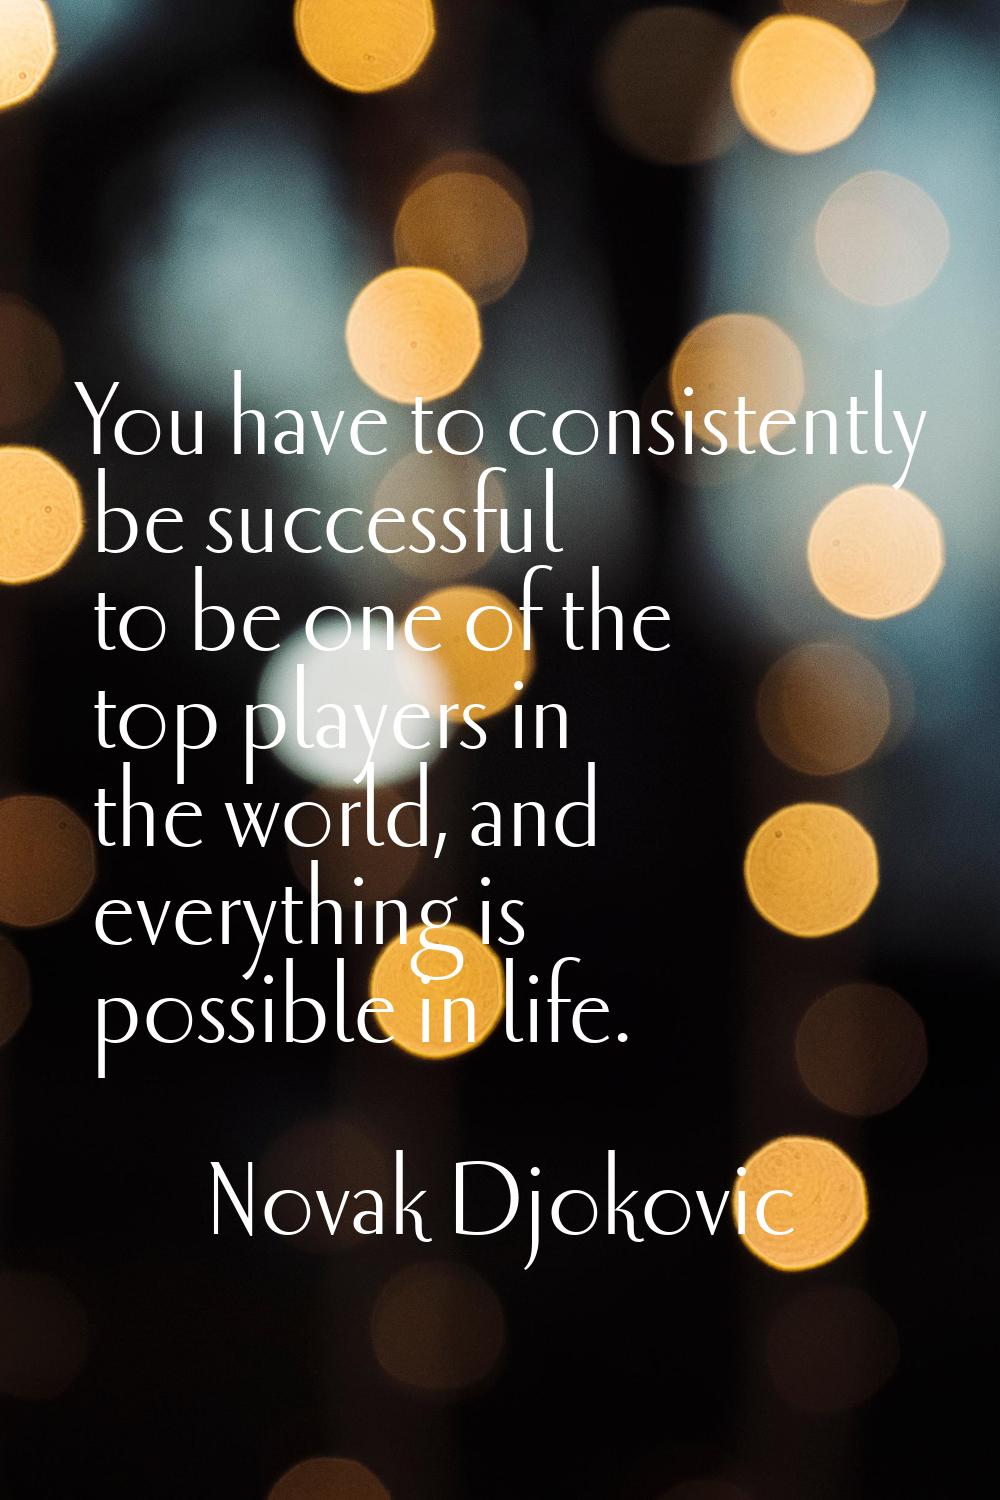 You have to consistently be successful to be one of the top players in the world, and everything is